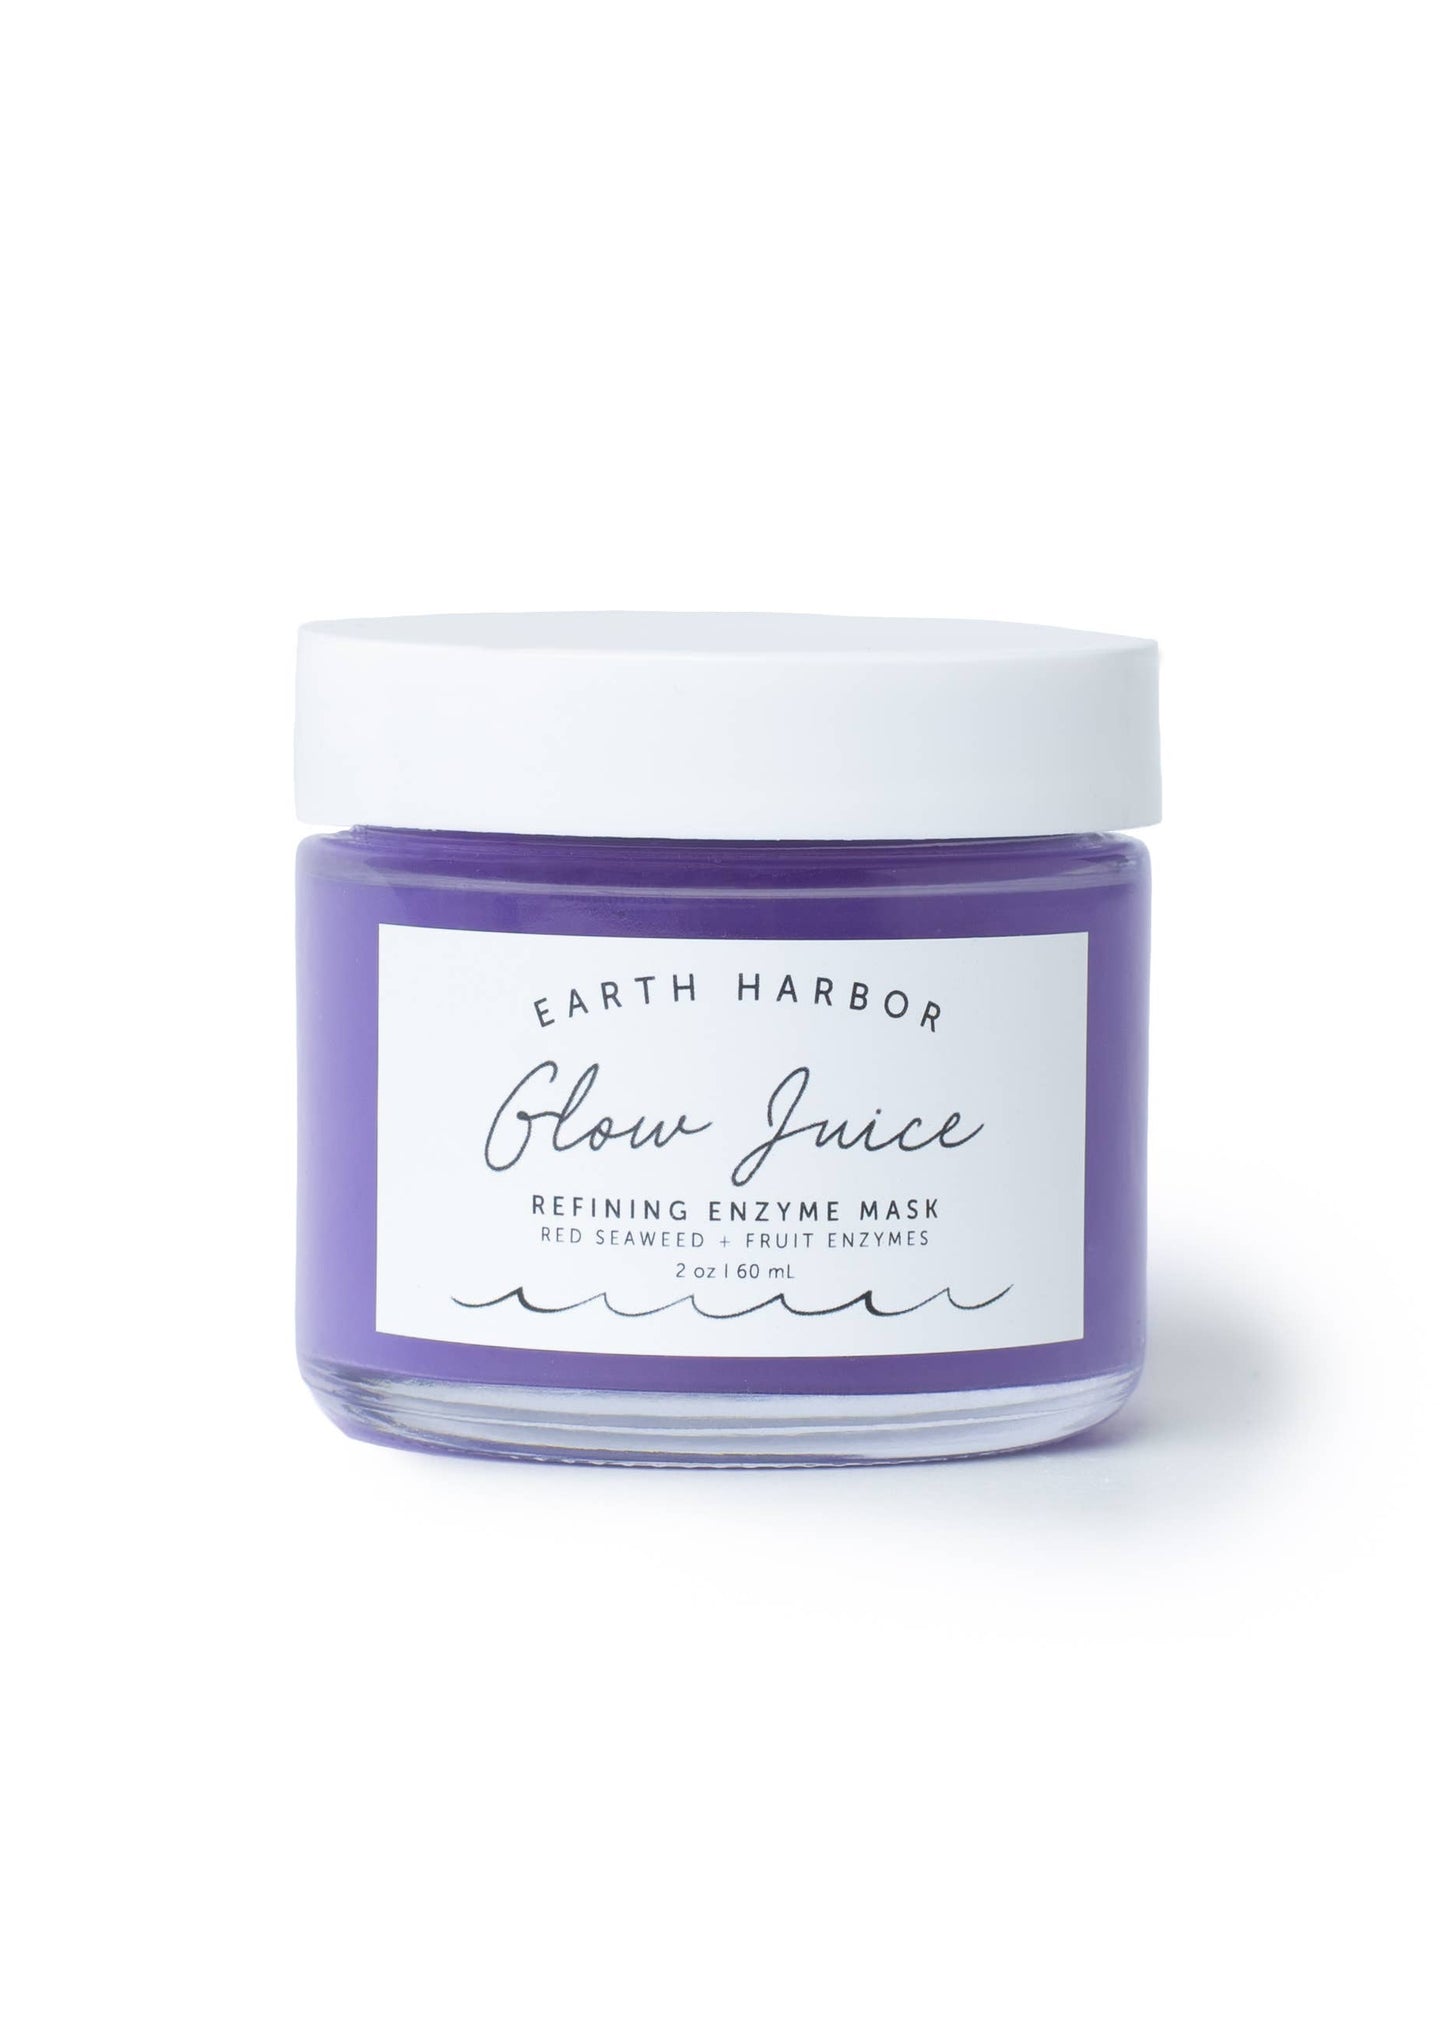 Enzyme Mask: Fruit Enzymes + Red Seaweed Core Earth Harbor Naturals